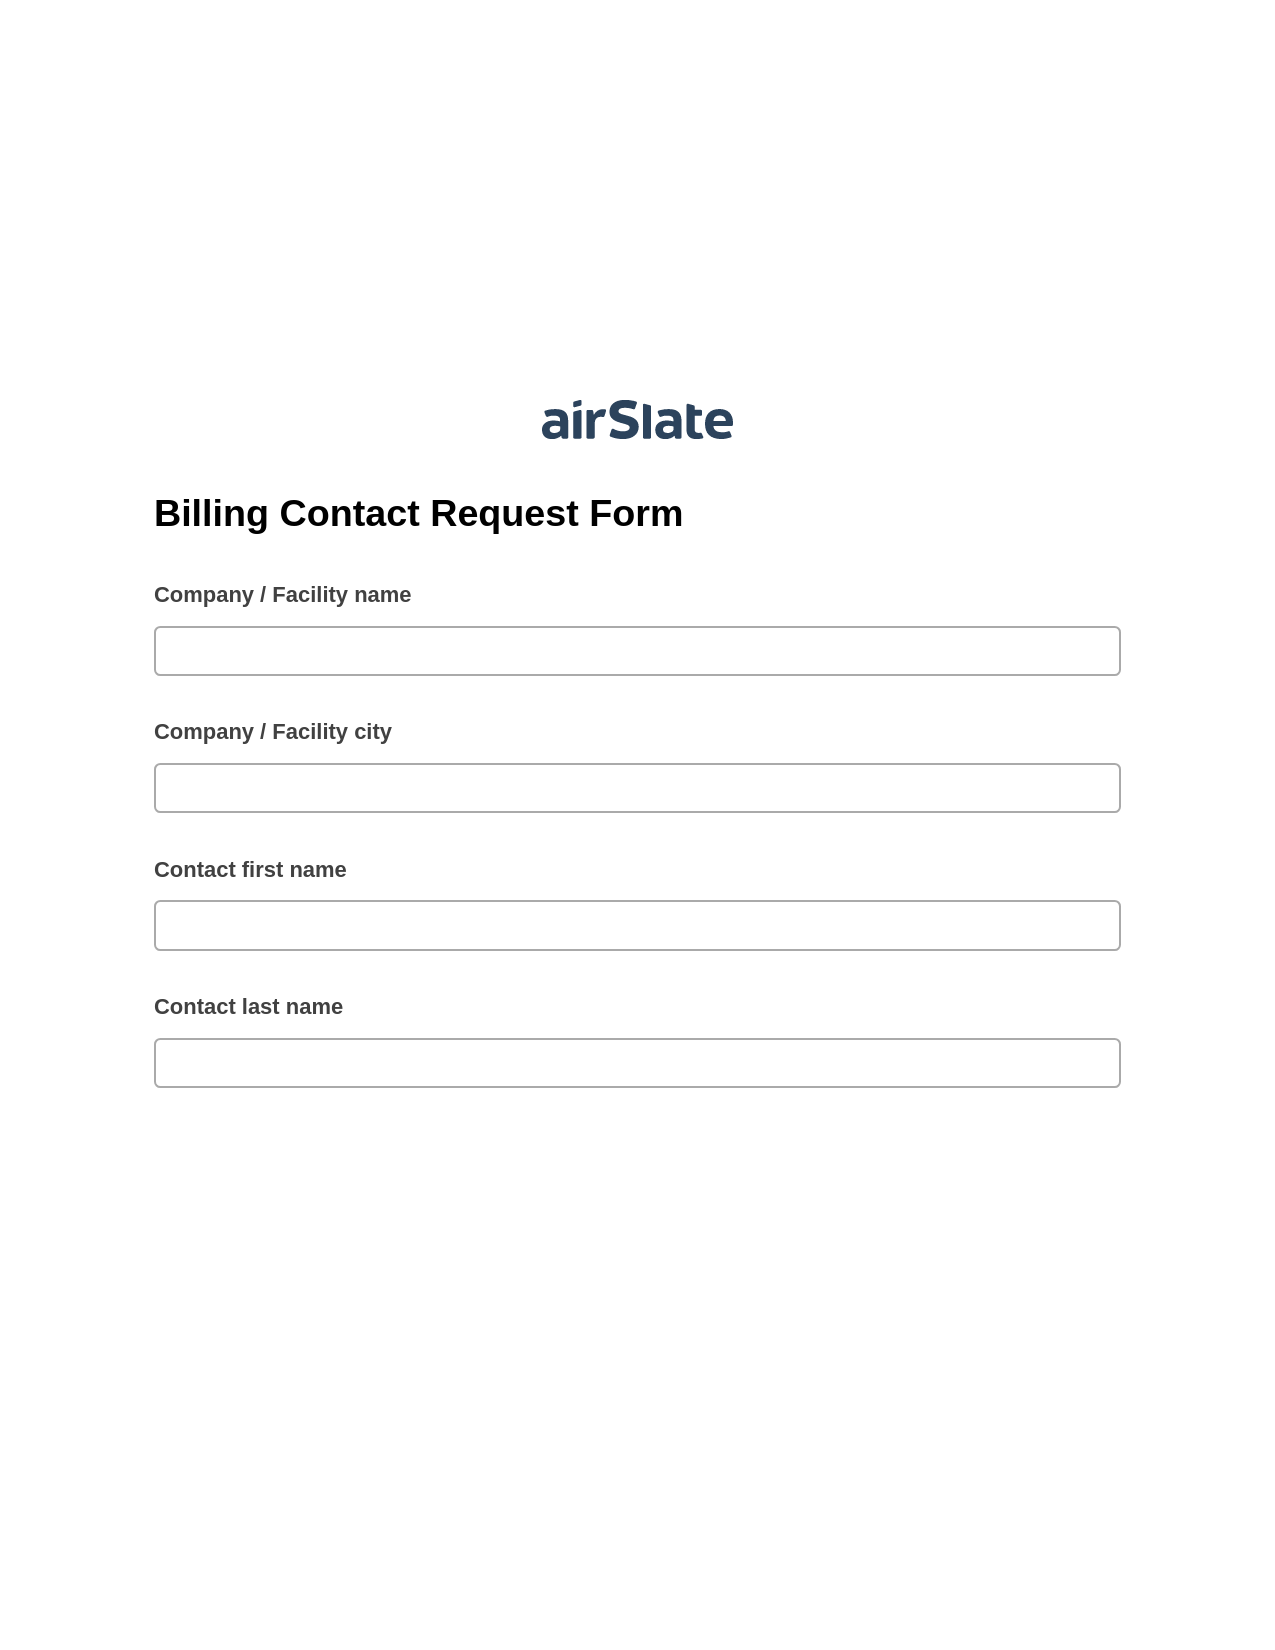 Billing Contact Request Form Pre-fill Dropdowns from CSV File Bot, Export to MS Dynamics 365 Bot, Google Drive Bot